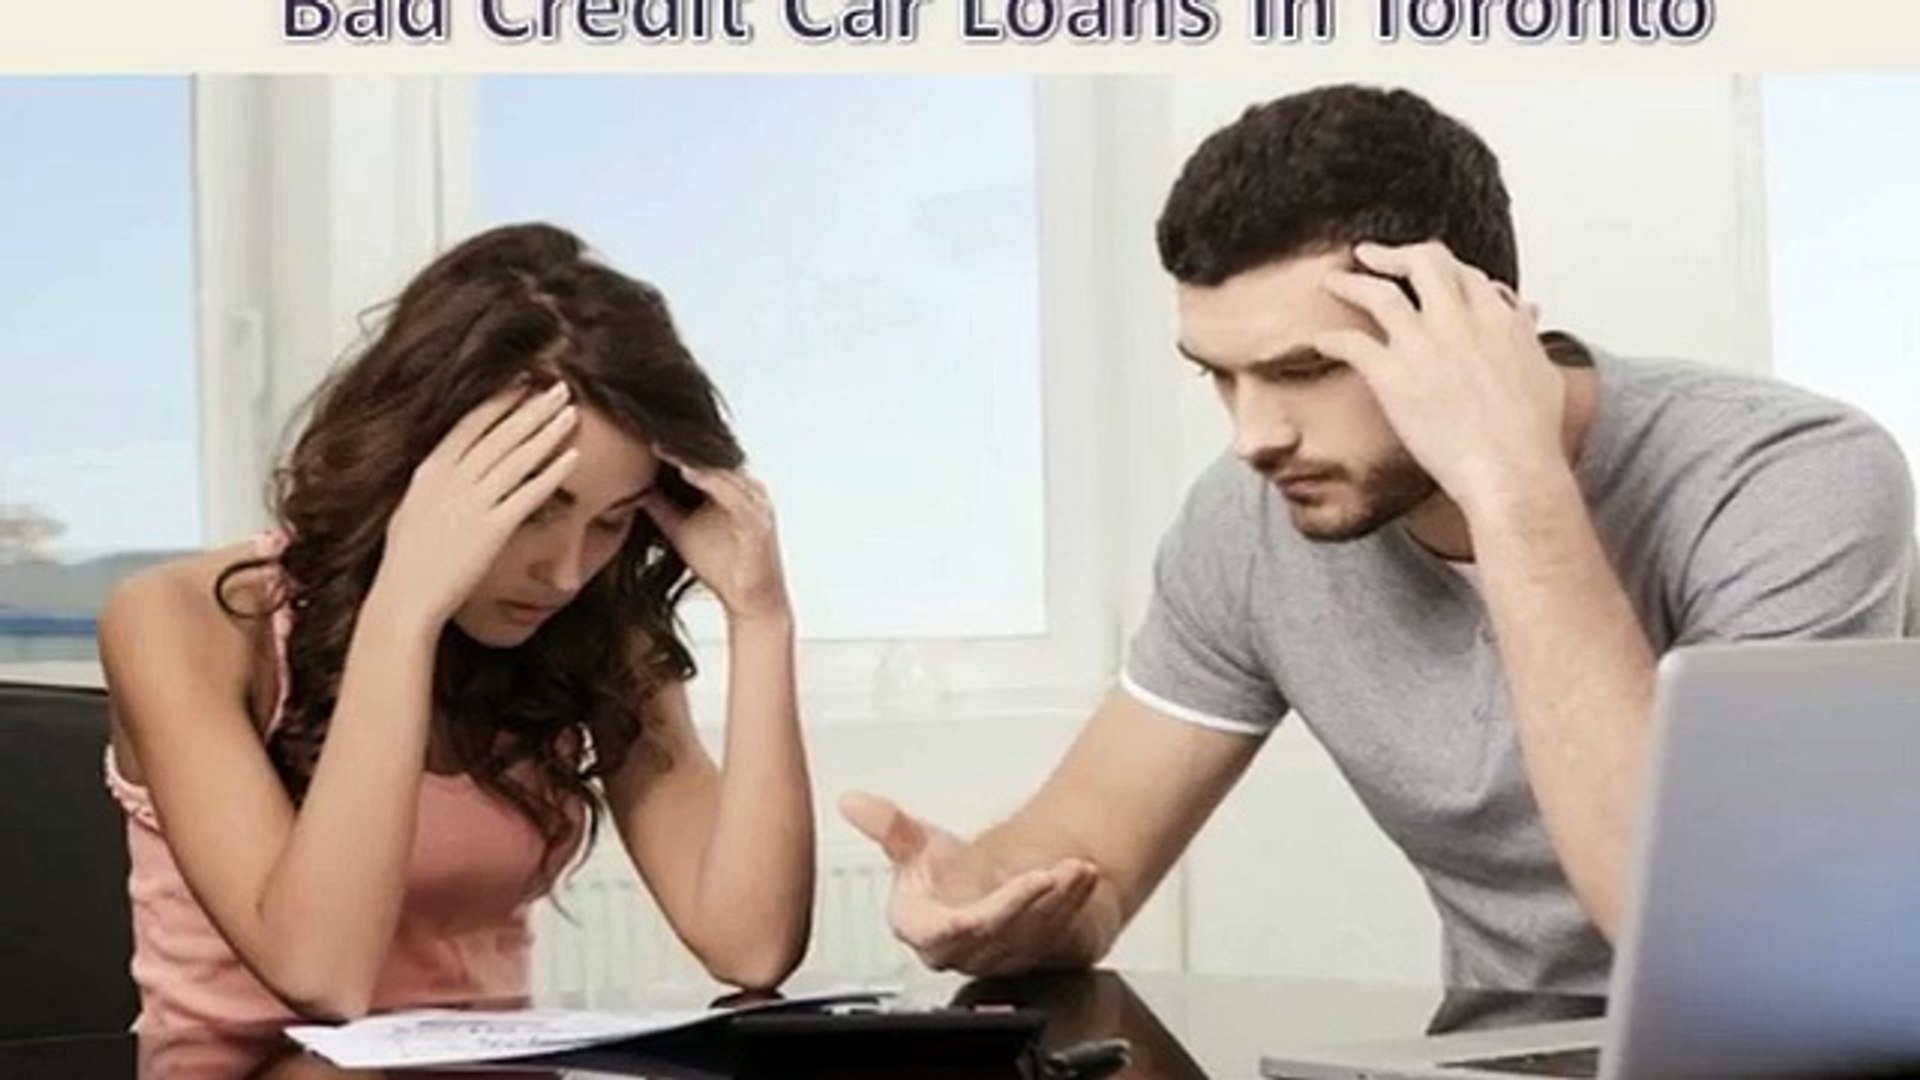 Get quick and instant relief from bad credit car loans in Toronto|Ontario